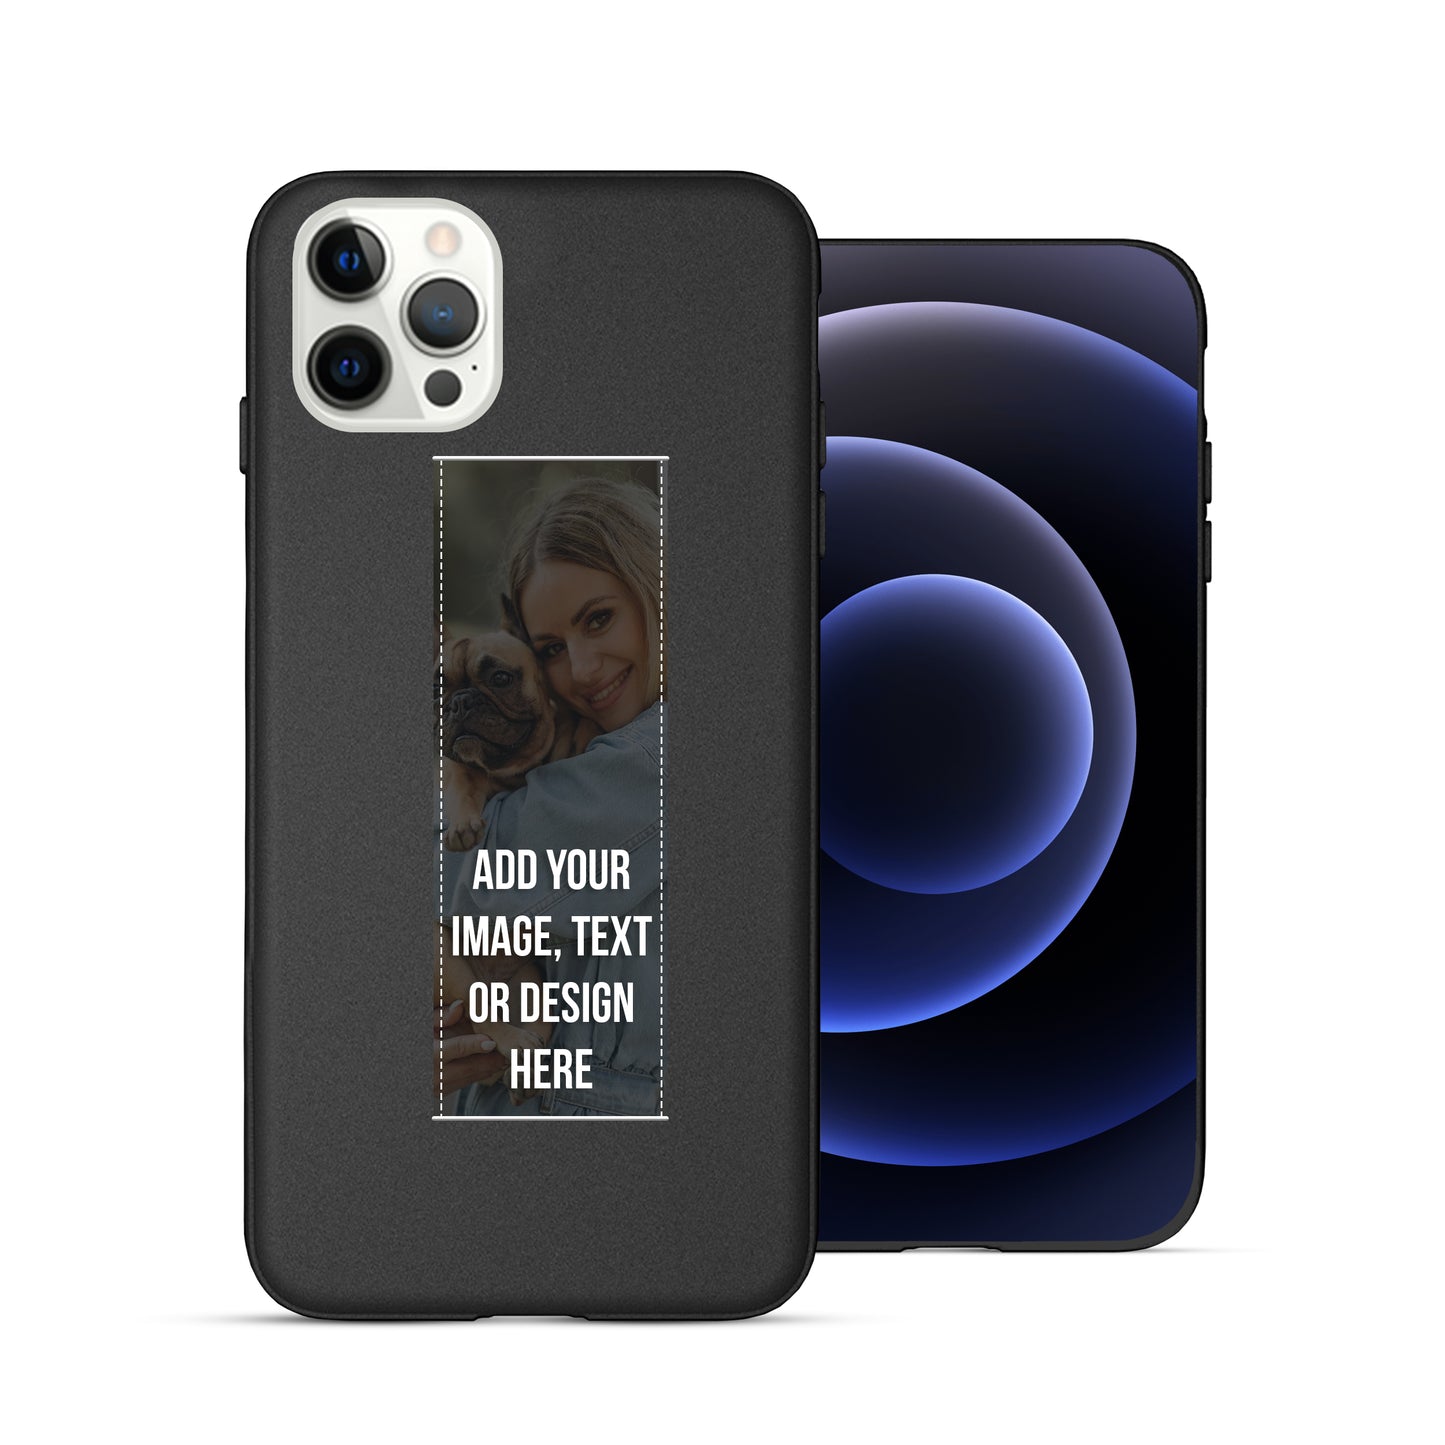 Finger Loop Phone Case For iPhone 11 Pro Black With Custom Strap